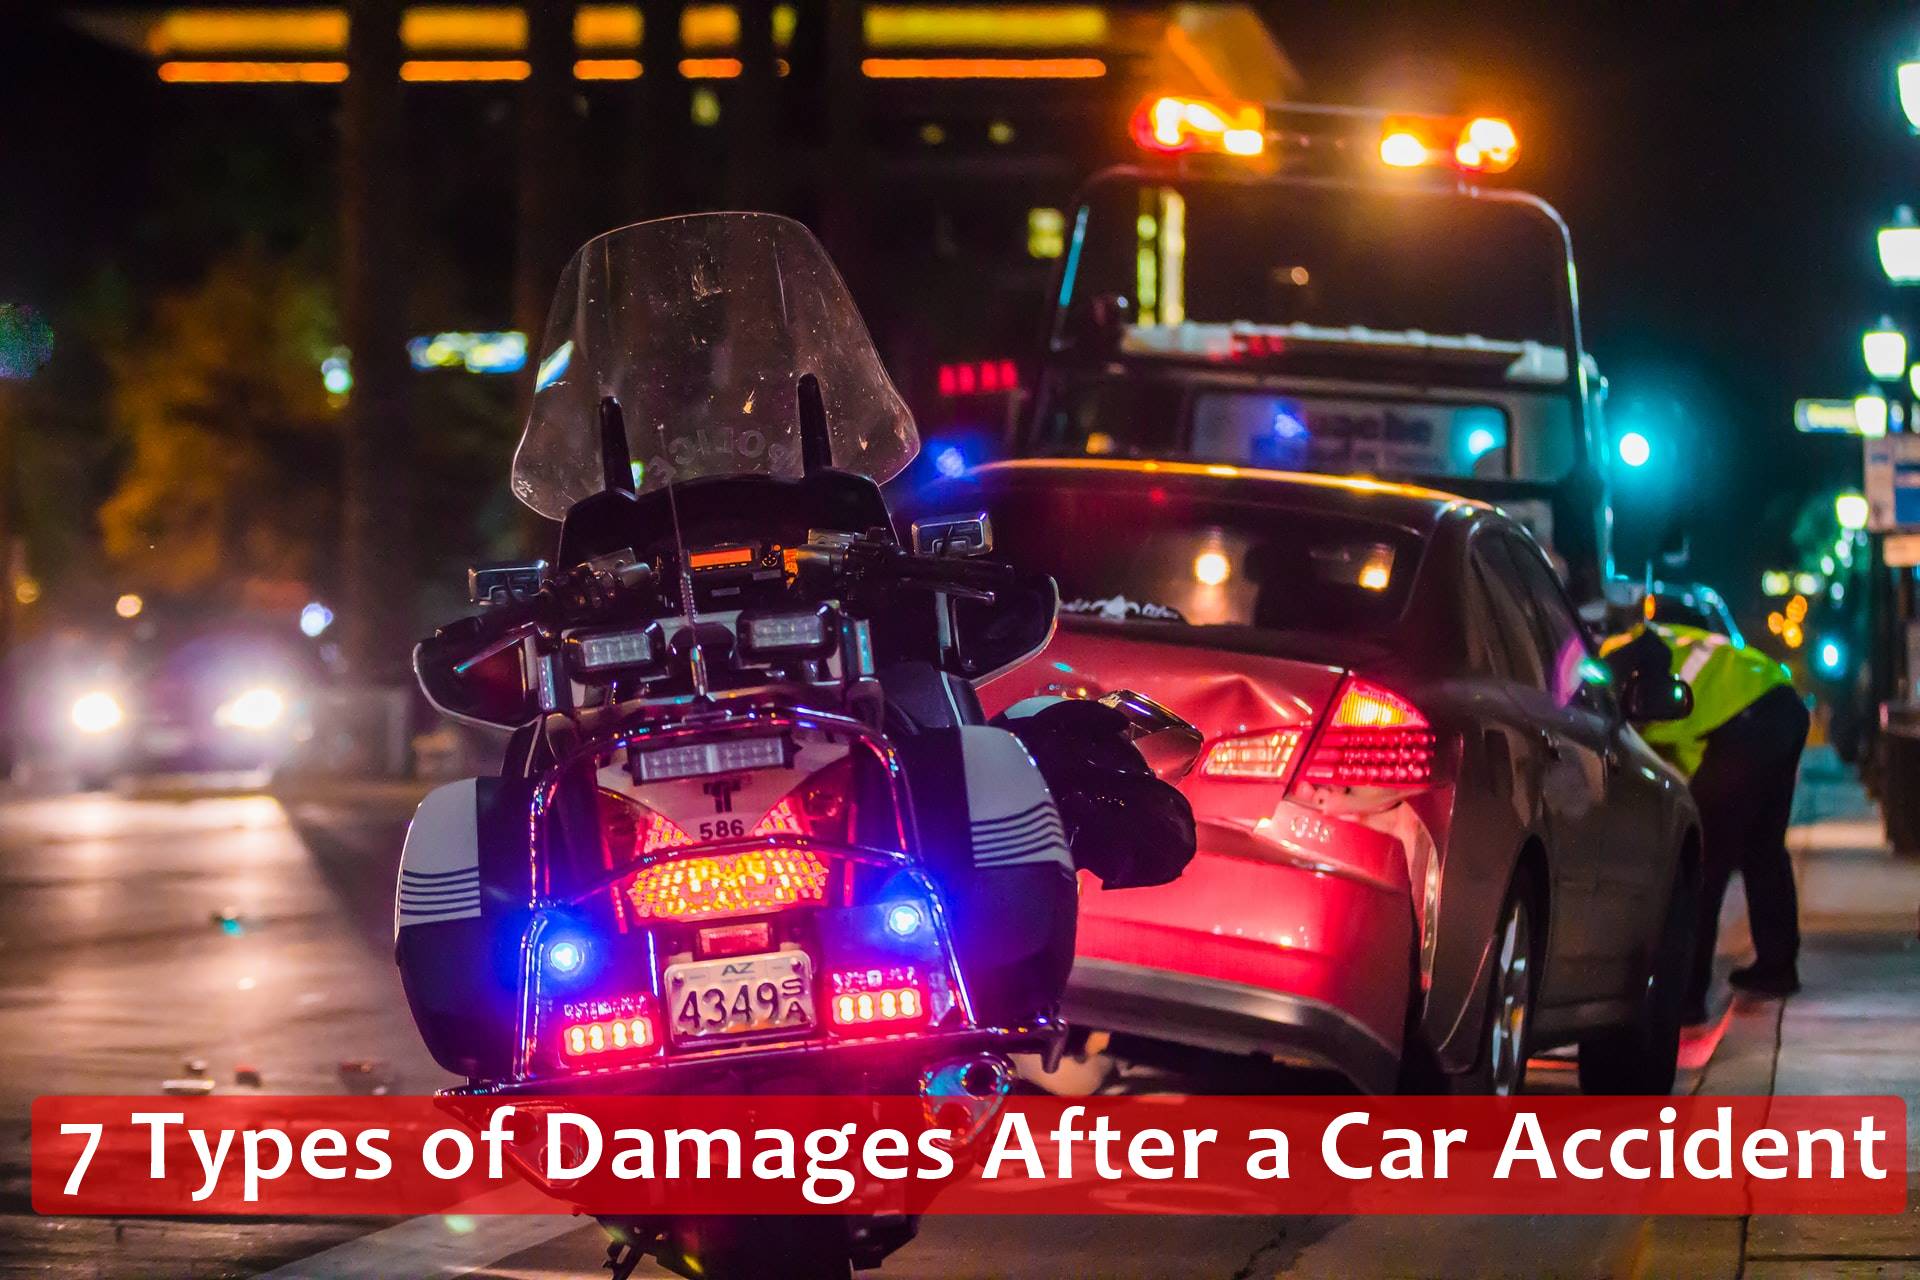 7 Types of Damages After a Car Accident